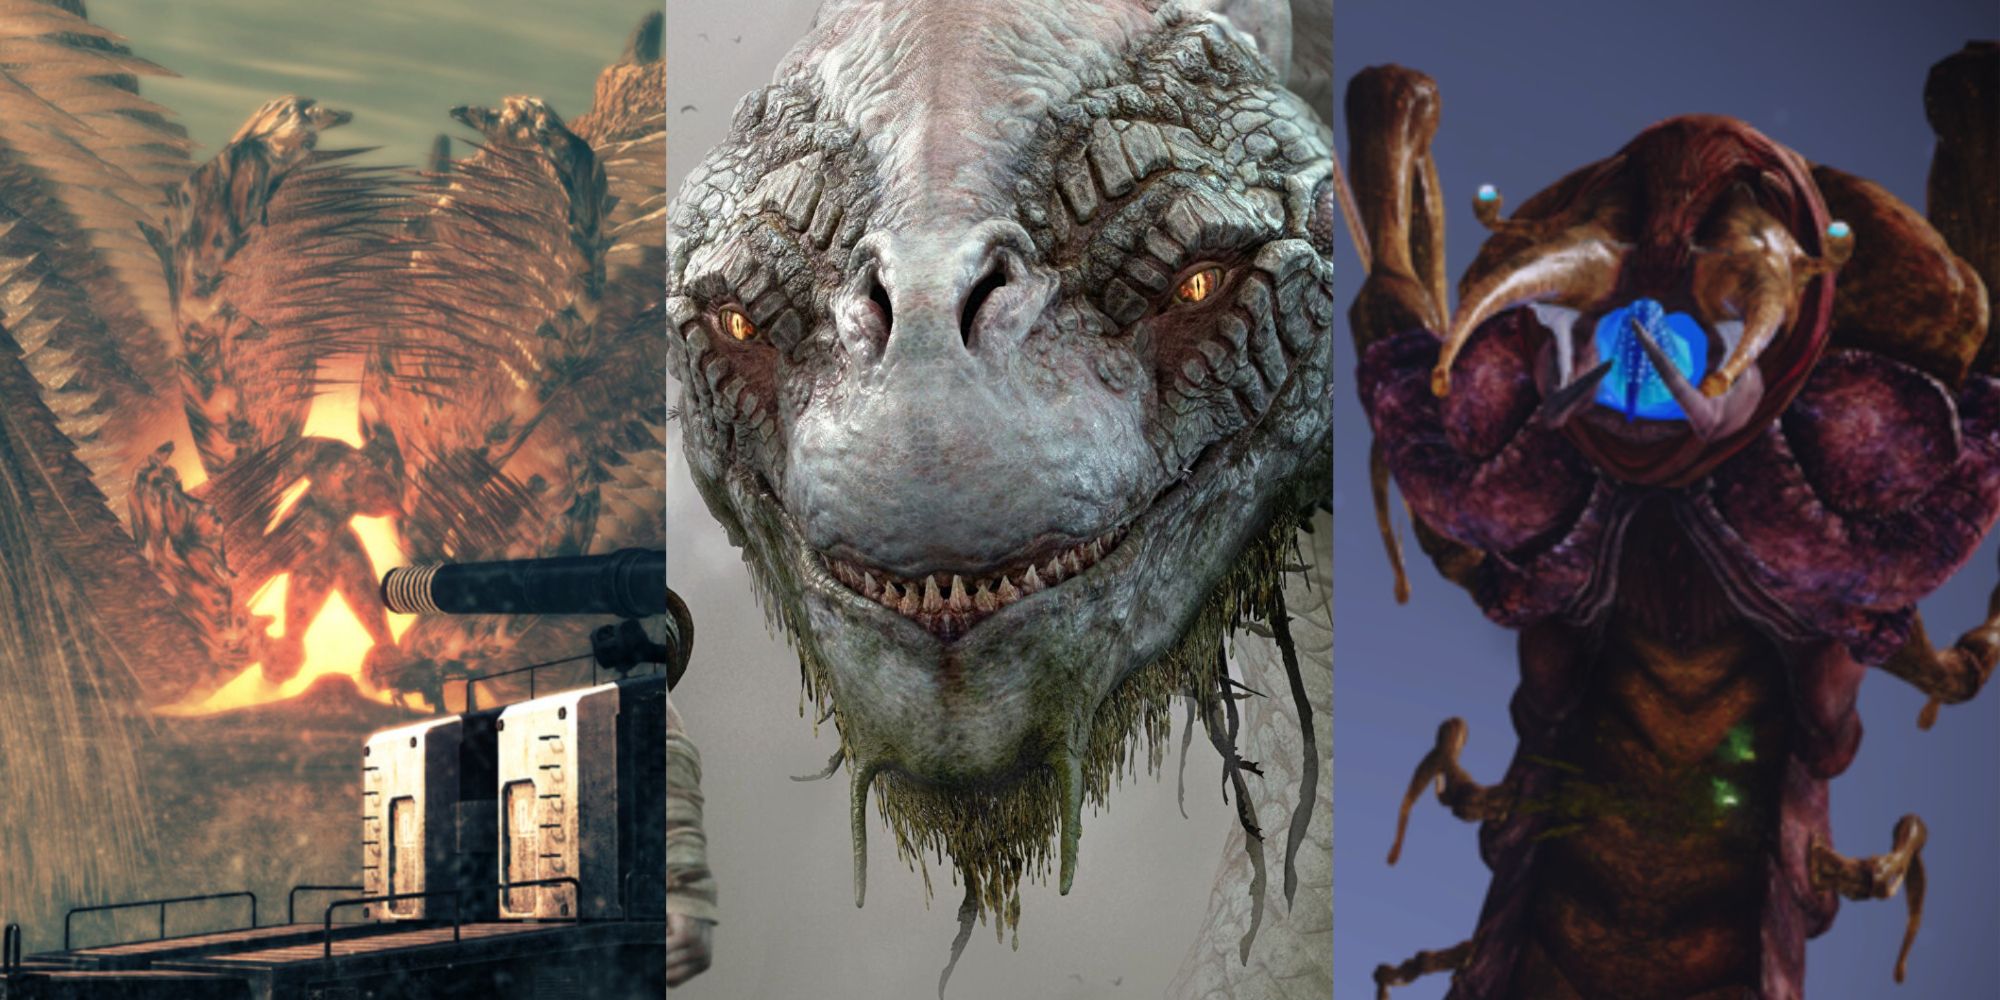 Collage of Largest Video Game Monsters, featuring Lost Planet 2, God of War, and Mass Effect Legendary Edition